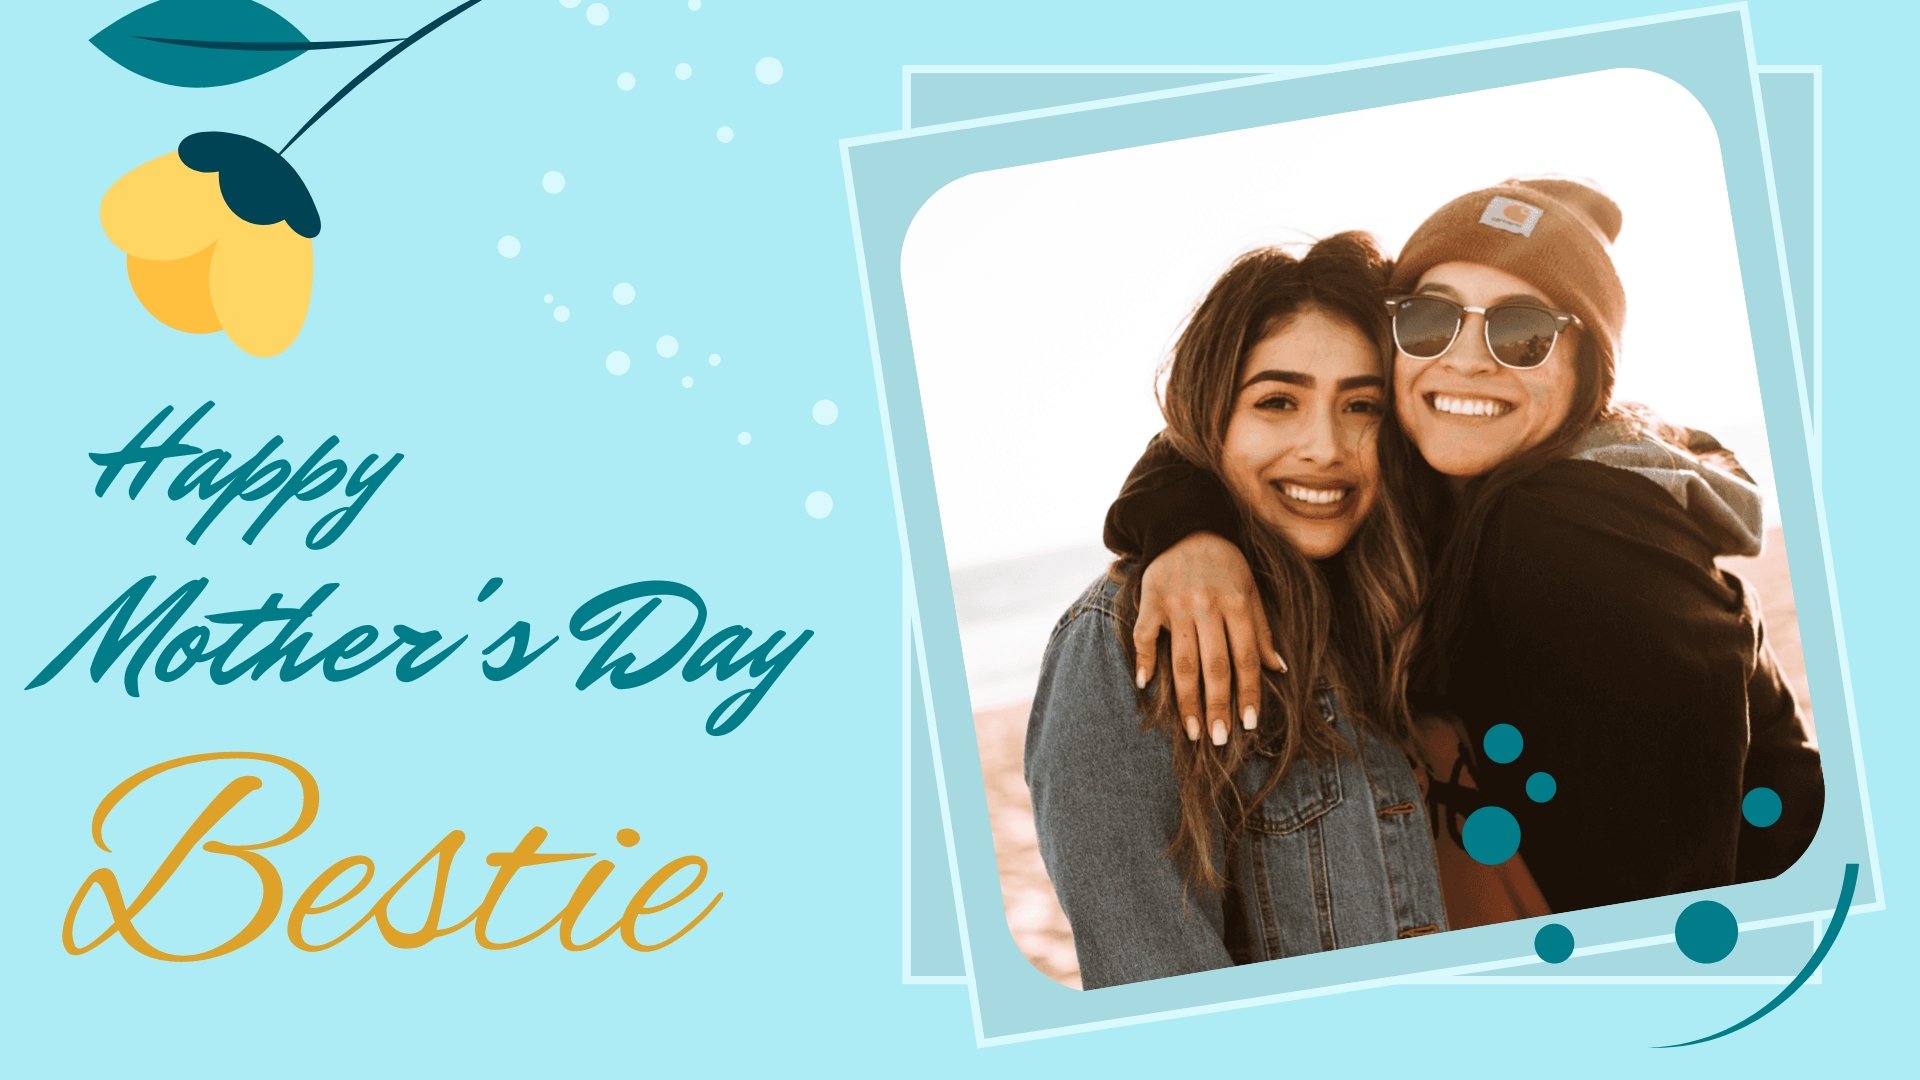 Free Happy Mother's Day To My Best Friend Image Template